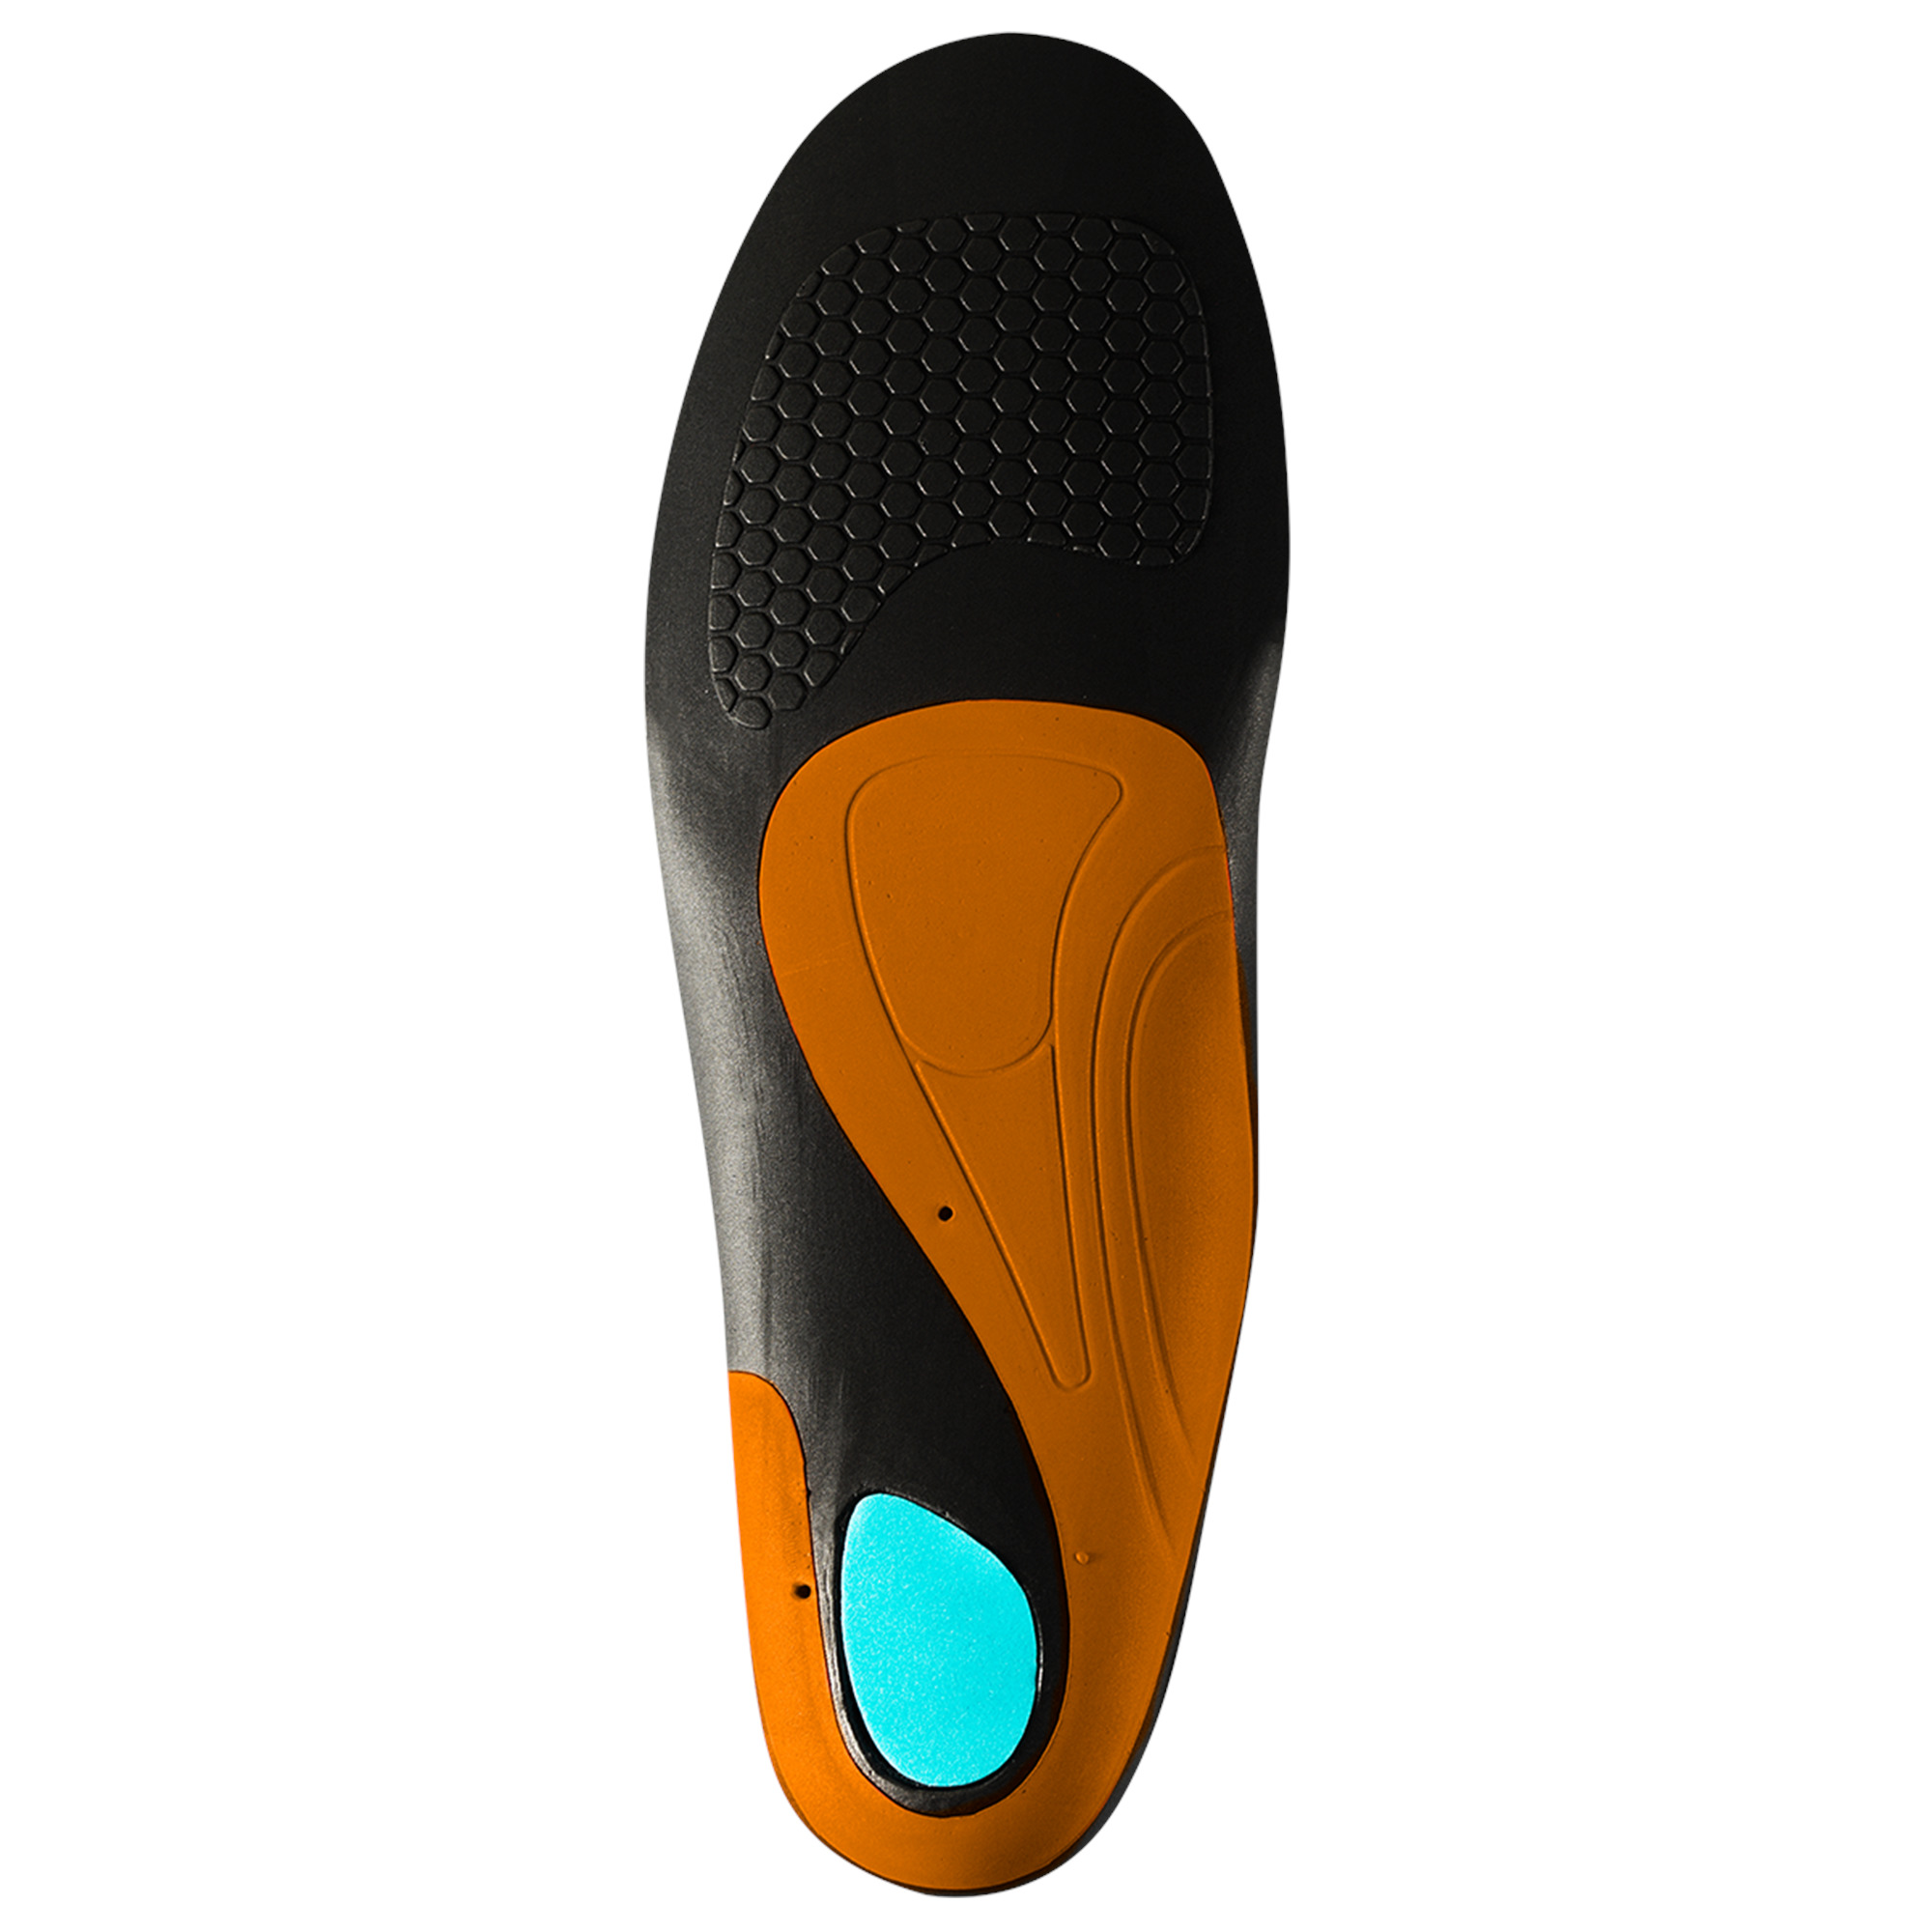 MOTION insoles